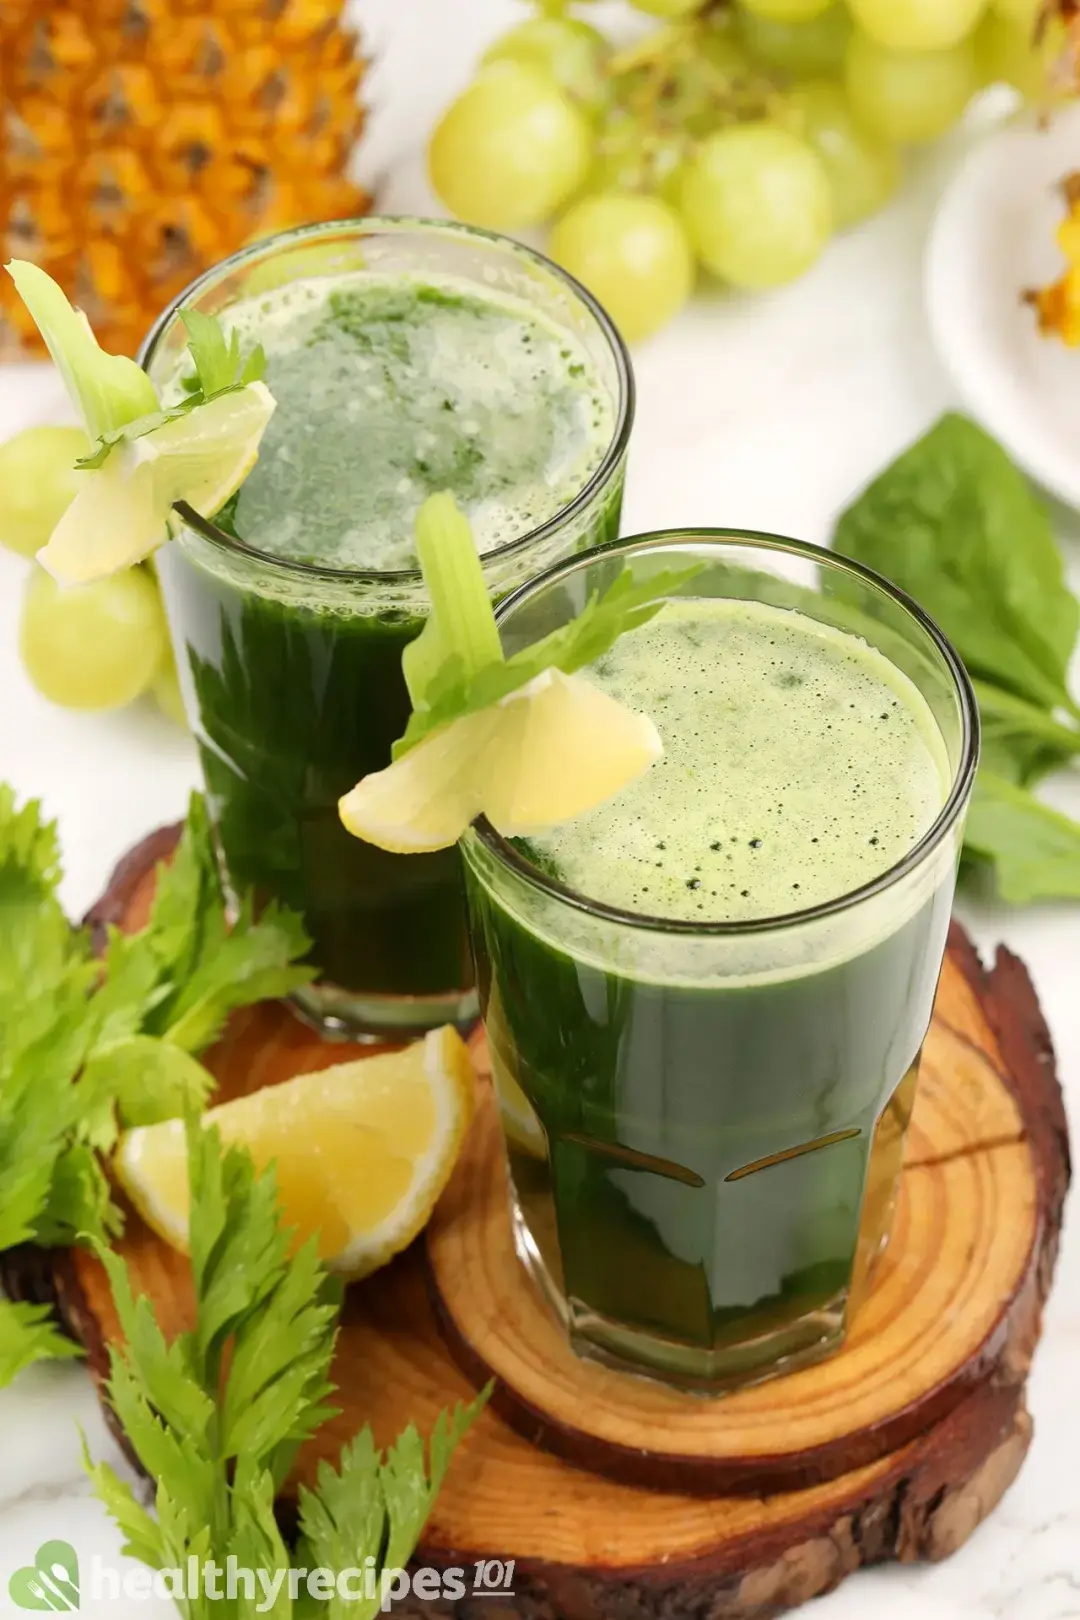 Health benefits of This Spinach Juice 1